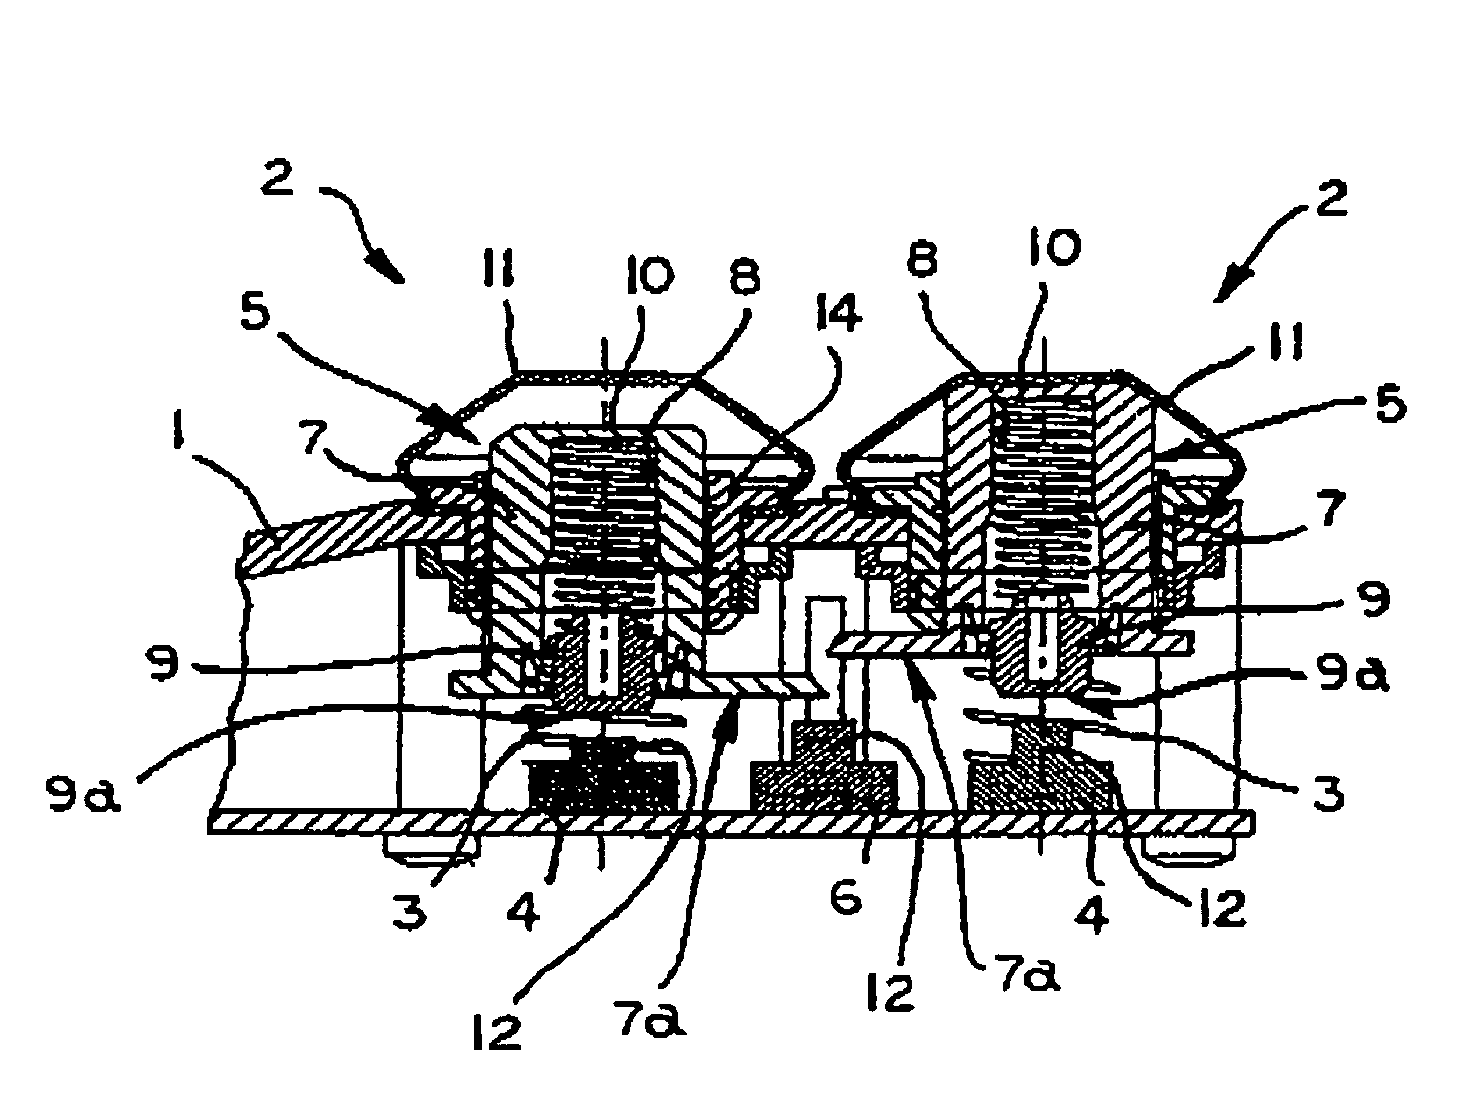 Operating device for manual actuation of hoisting equipment